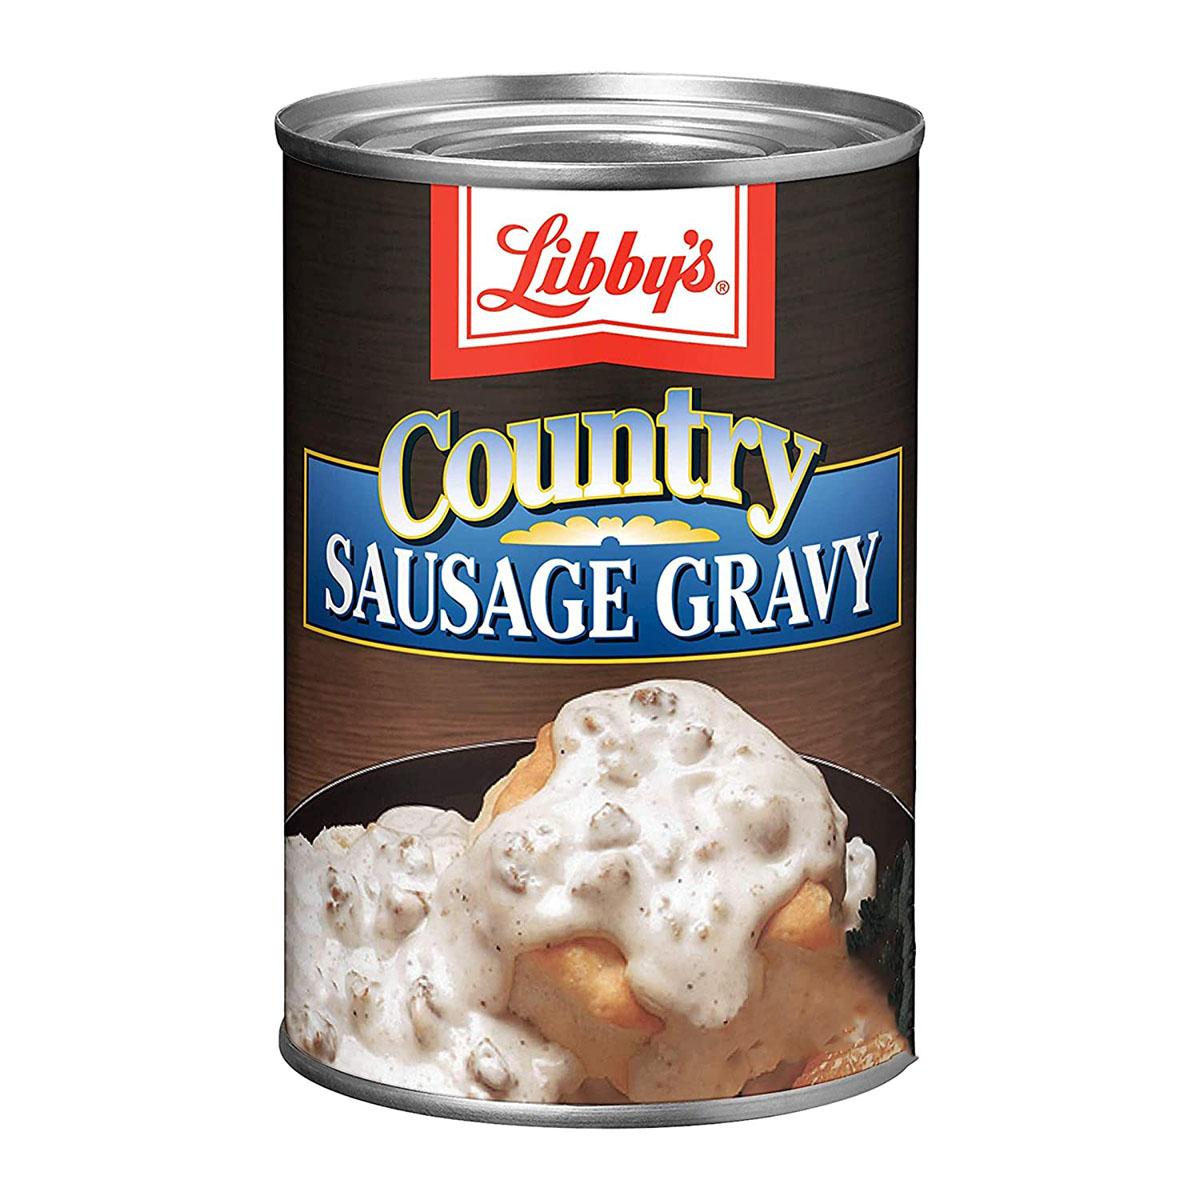 12 Libbys Country Sausage Gravy for $10.93 Shipped